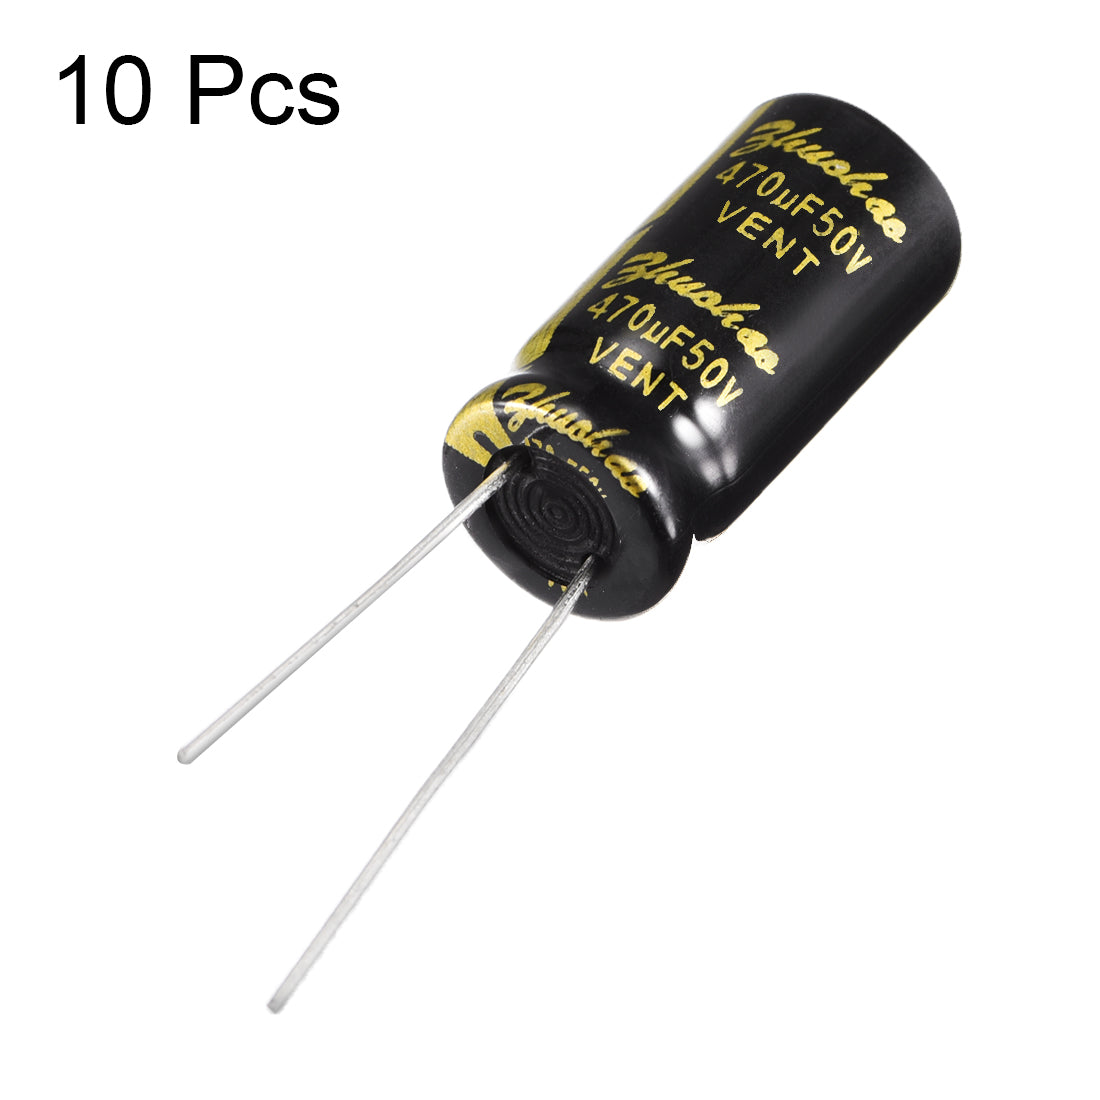 uxcell Uxcell Aluminum Radial Electrolytic Capacitor with 470uF 50V 105 Celsius Life 2000H 10 x 20 mm Black 10pcs